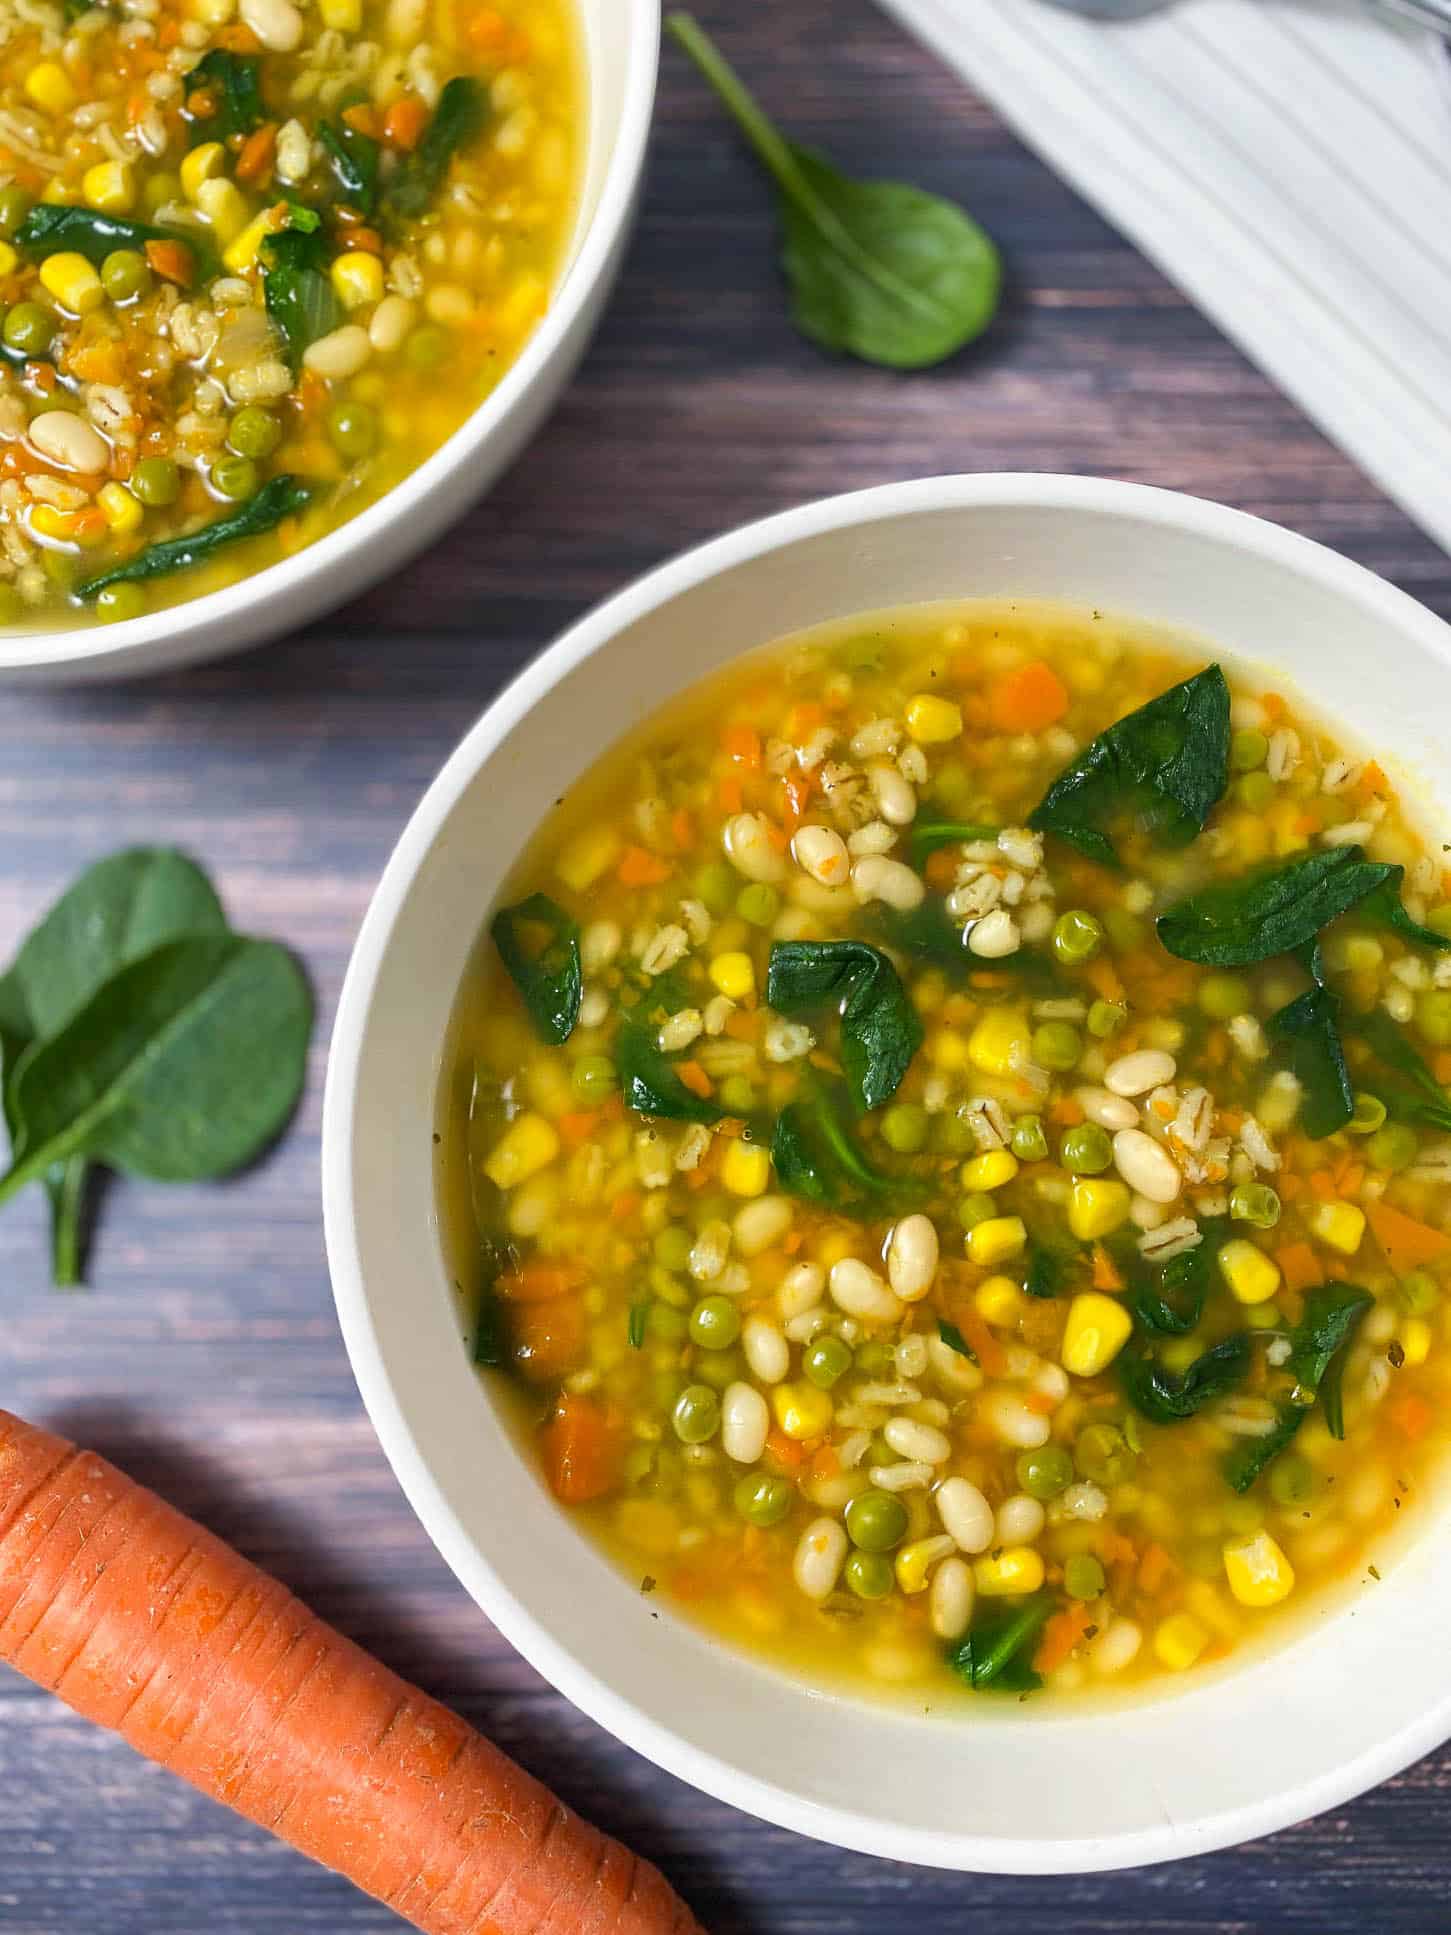 two bowls of vegetable soup with spinach and carrots in background